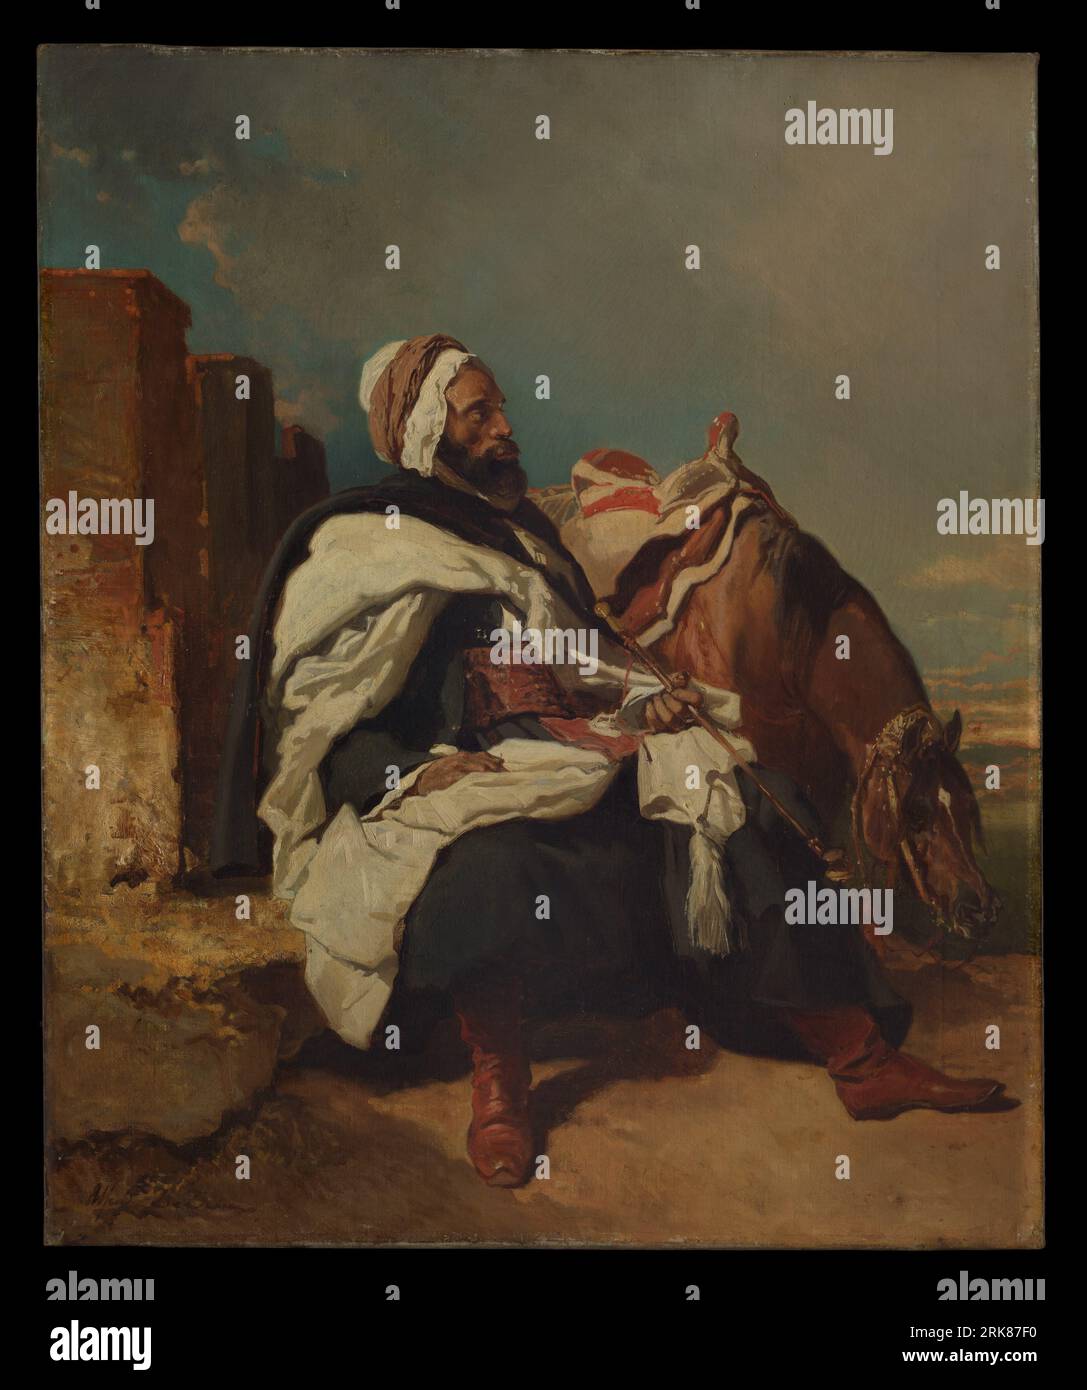 Seated Arab Man with Horse between 1850 and 1858 by Alfred de Dreux Stock Photo